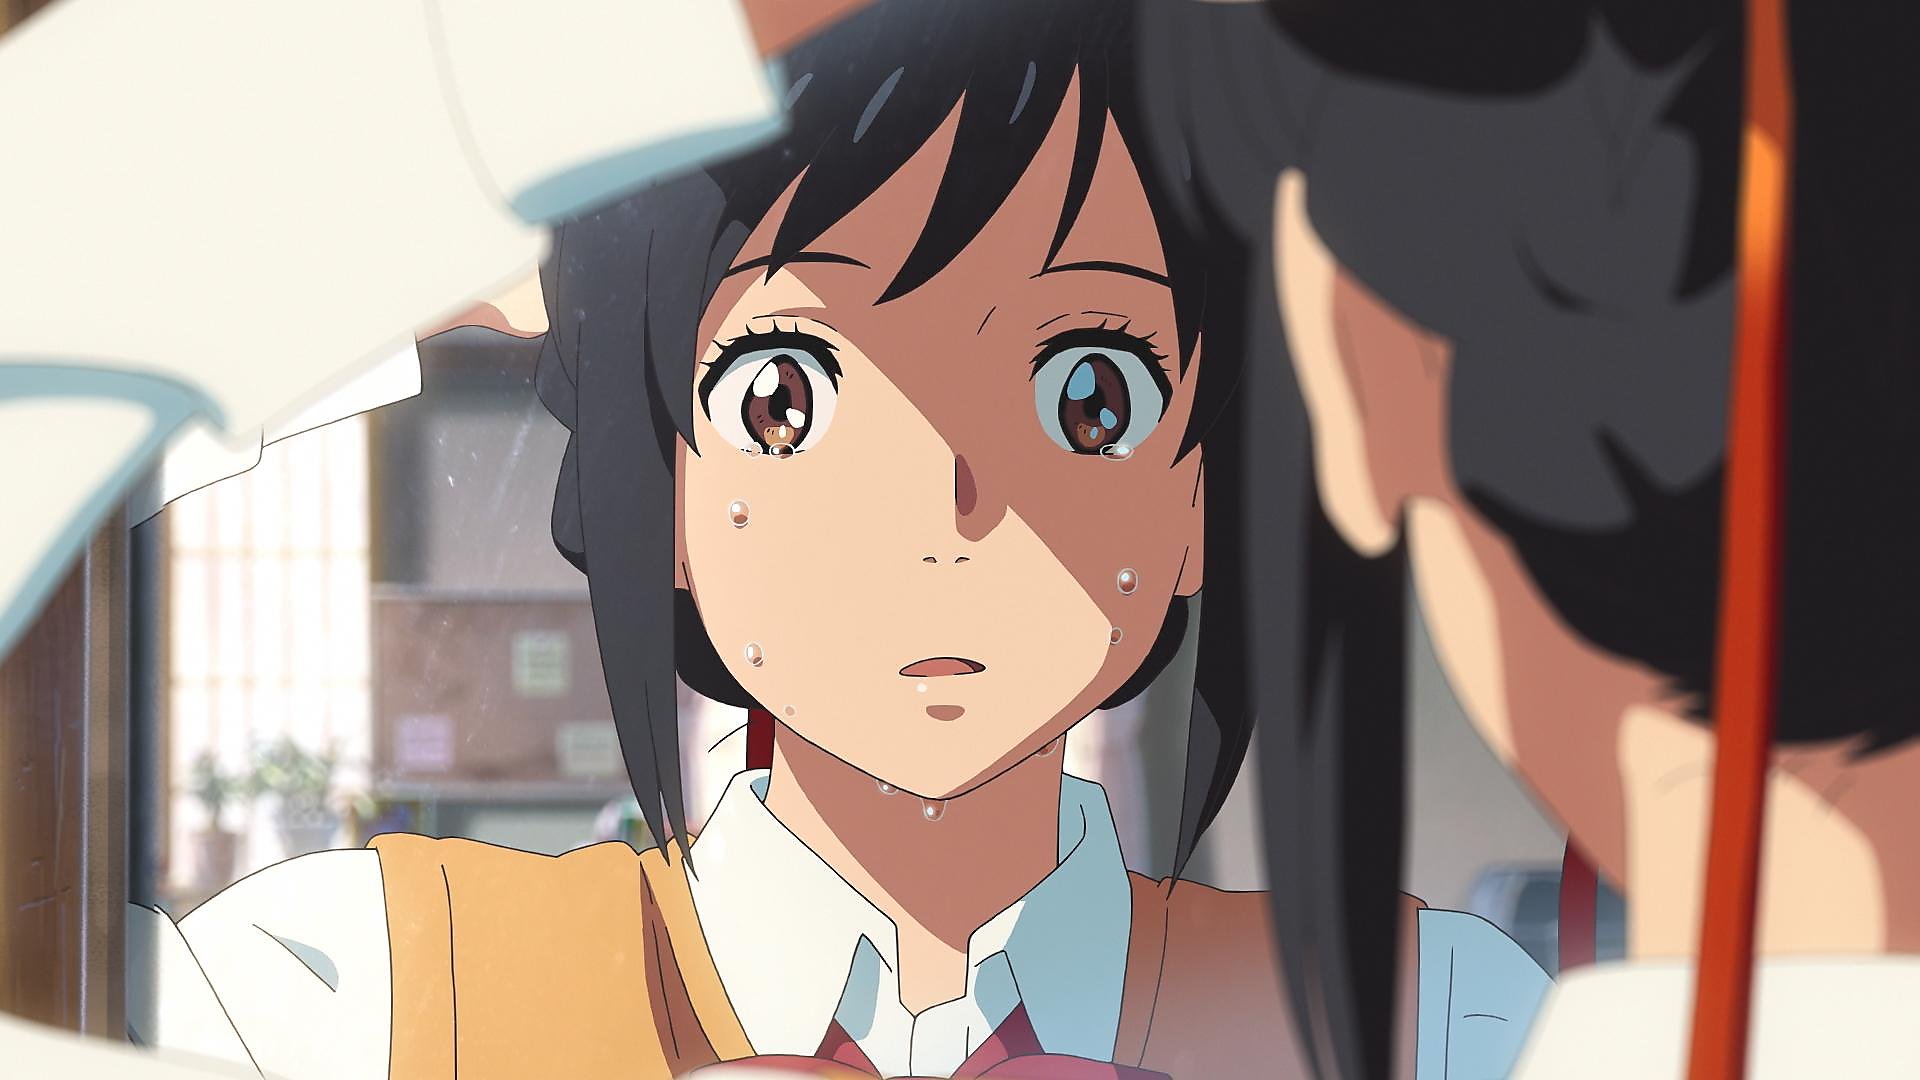 Japanese Anime Your Name Goes In Delightful Directions SFGate